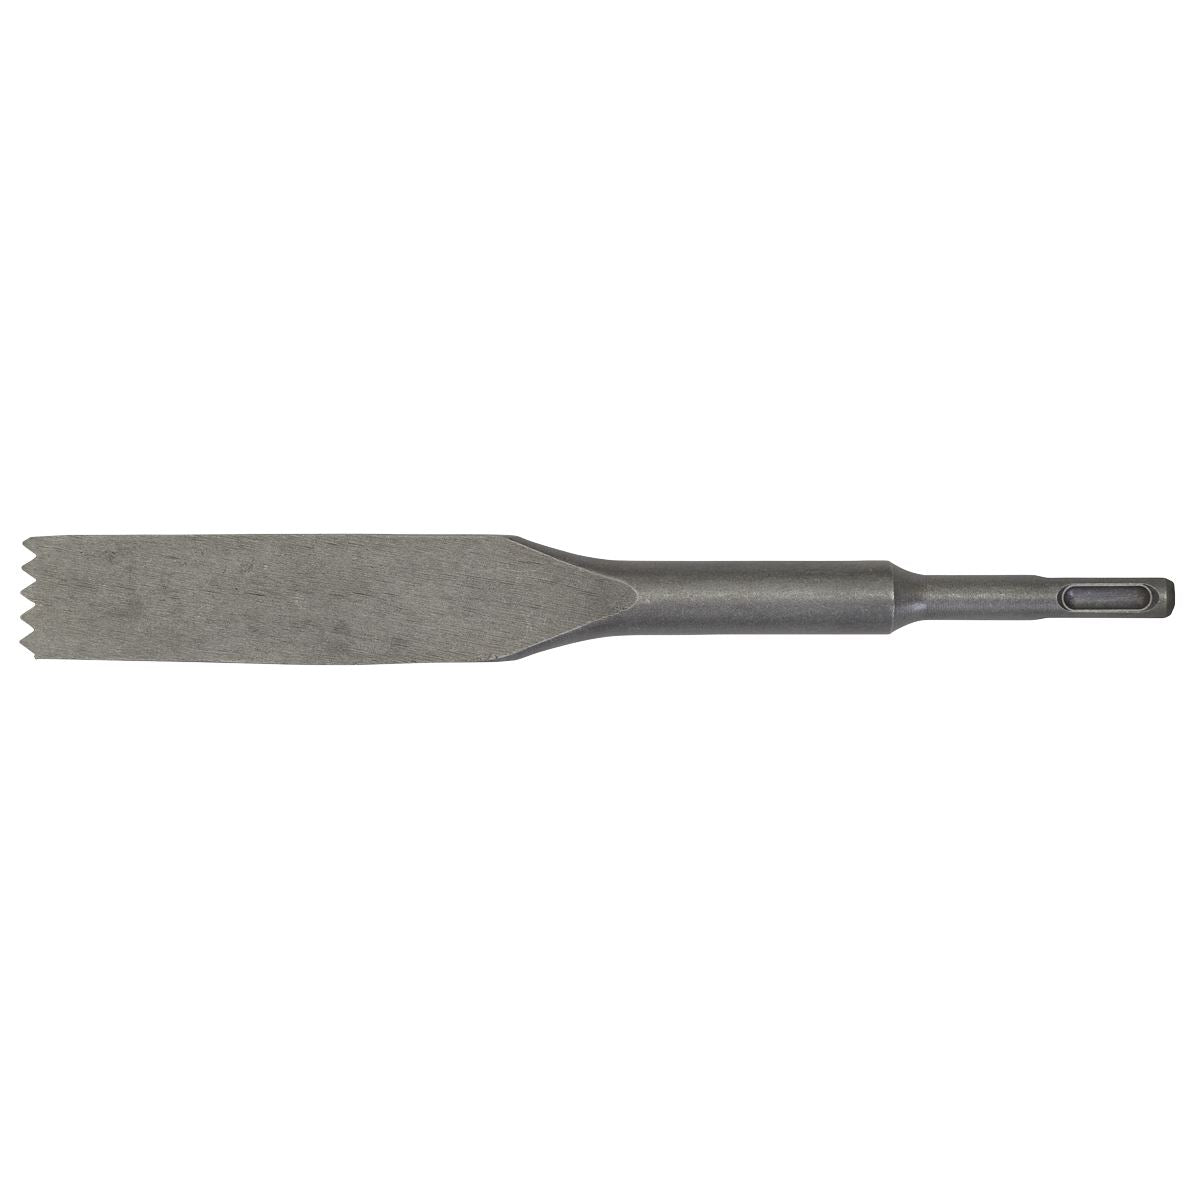 Sealey Toothed Mortar/Comb Chisel 30 x 250mm - SDS Plus D1CC